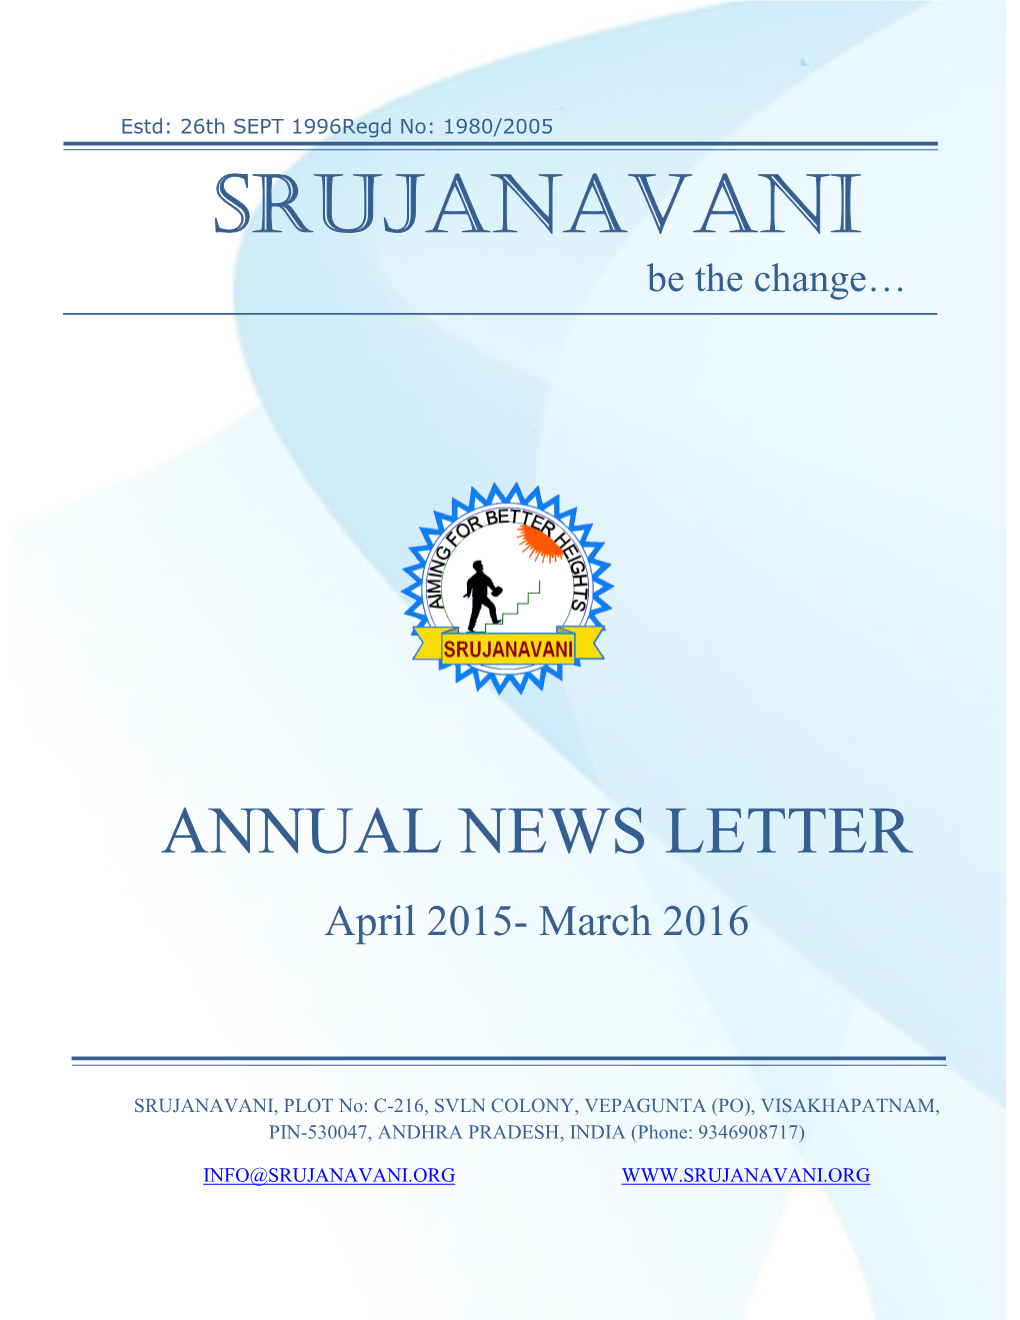 Annual Report for 2015